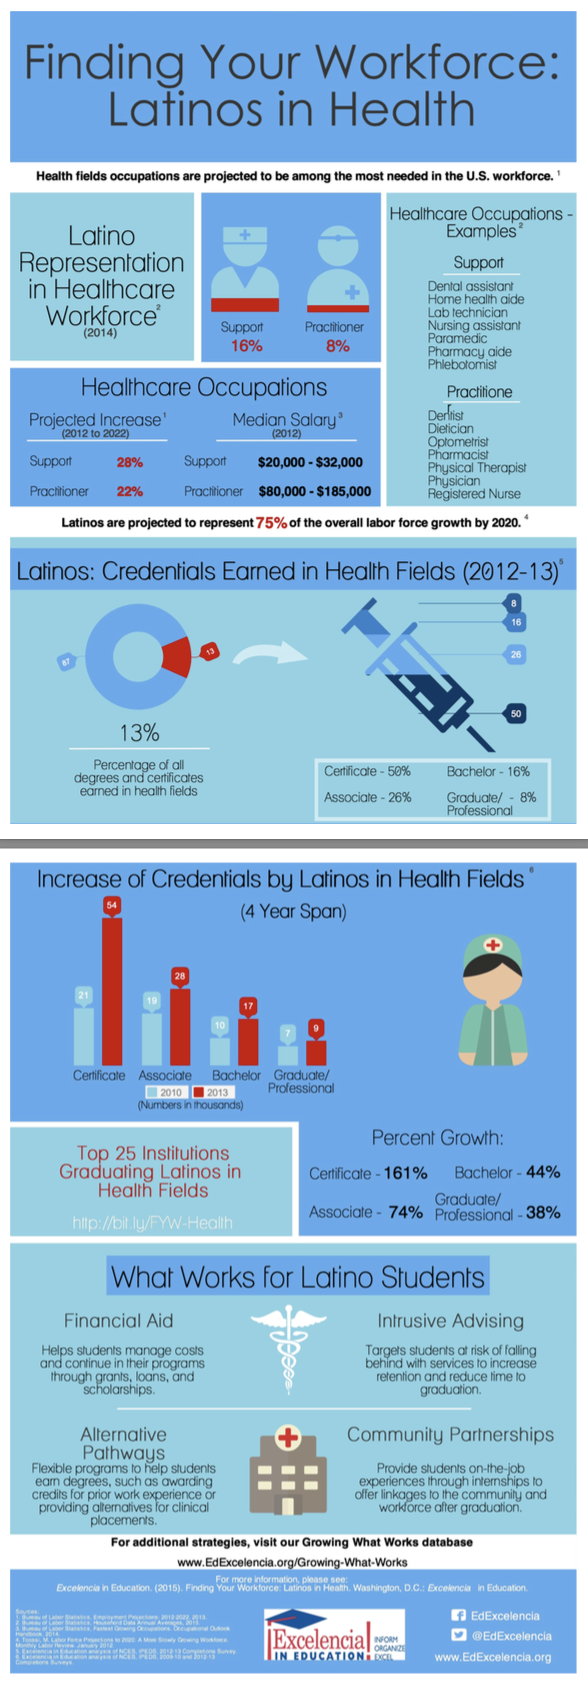 Infographic - Finding Your Workforce: Latinos in Health (JPG)